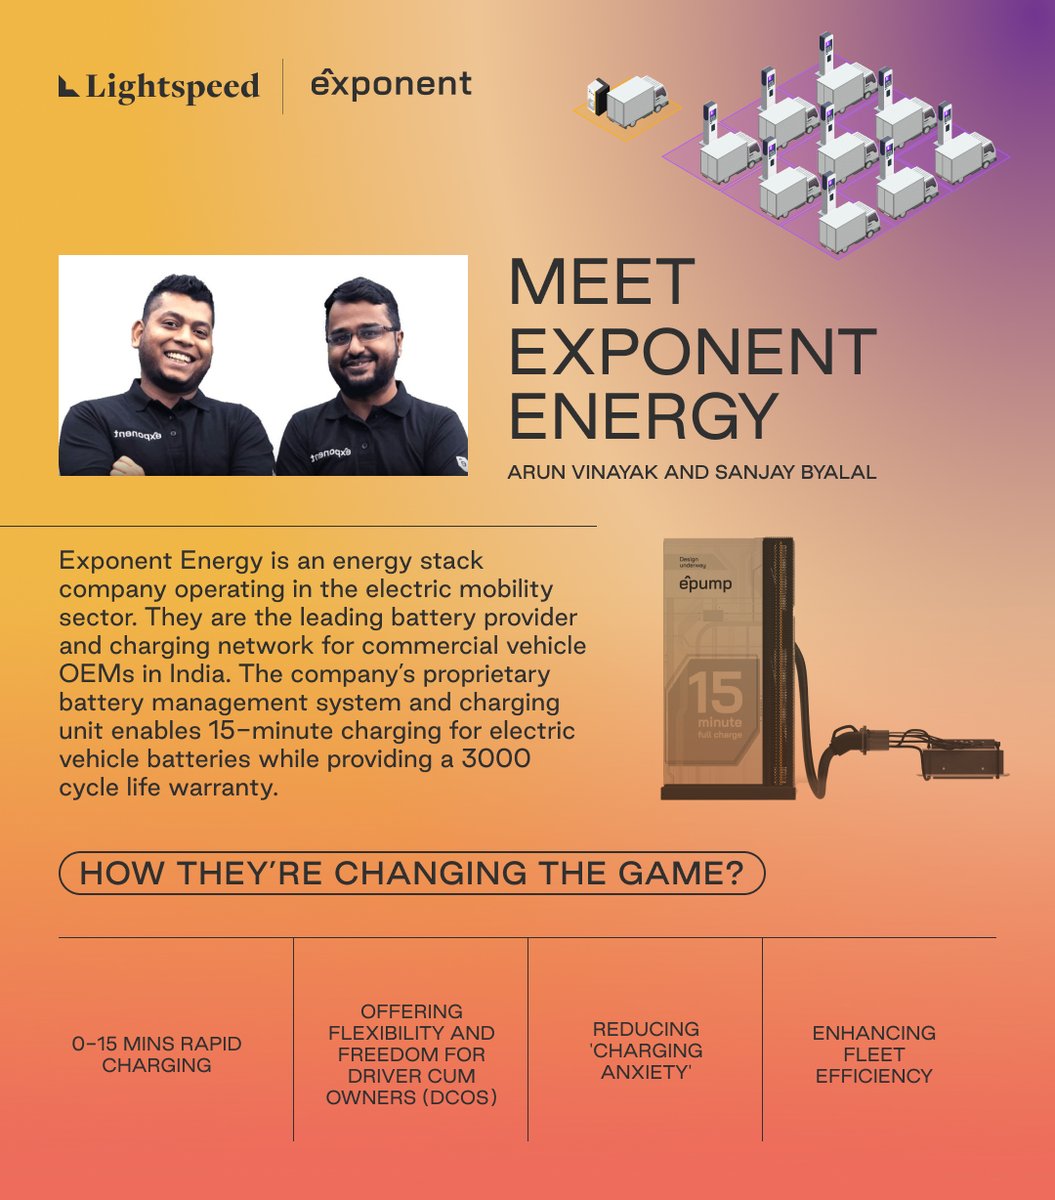 We're excited to continue our support for @ExponentEnergy as they accelerate India's EV revolution with their Series B round. Their innovative approach to rapid charging is setting new benchmarks for the EV industry. What's next? 🚗 Expanding their footprint to 5 new cities 🔌